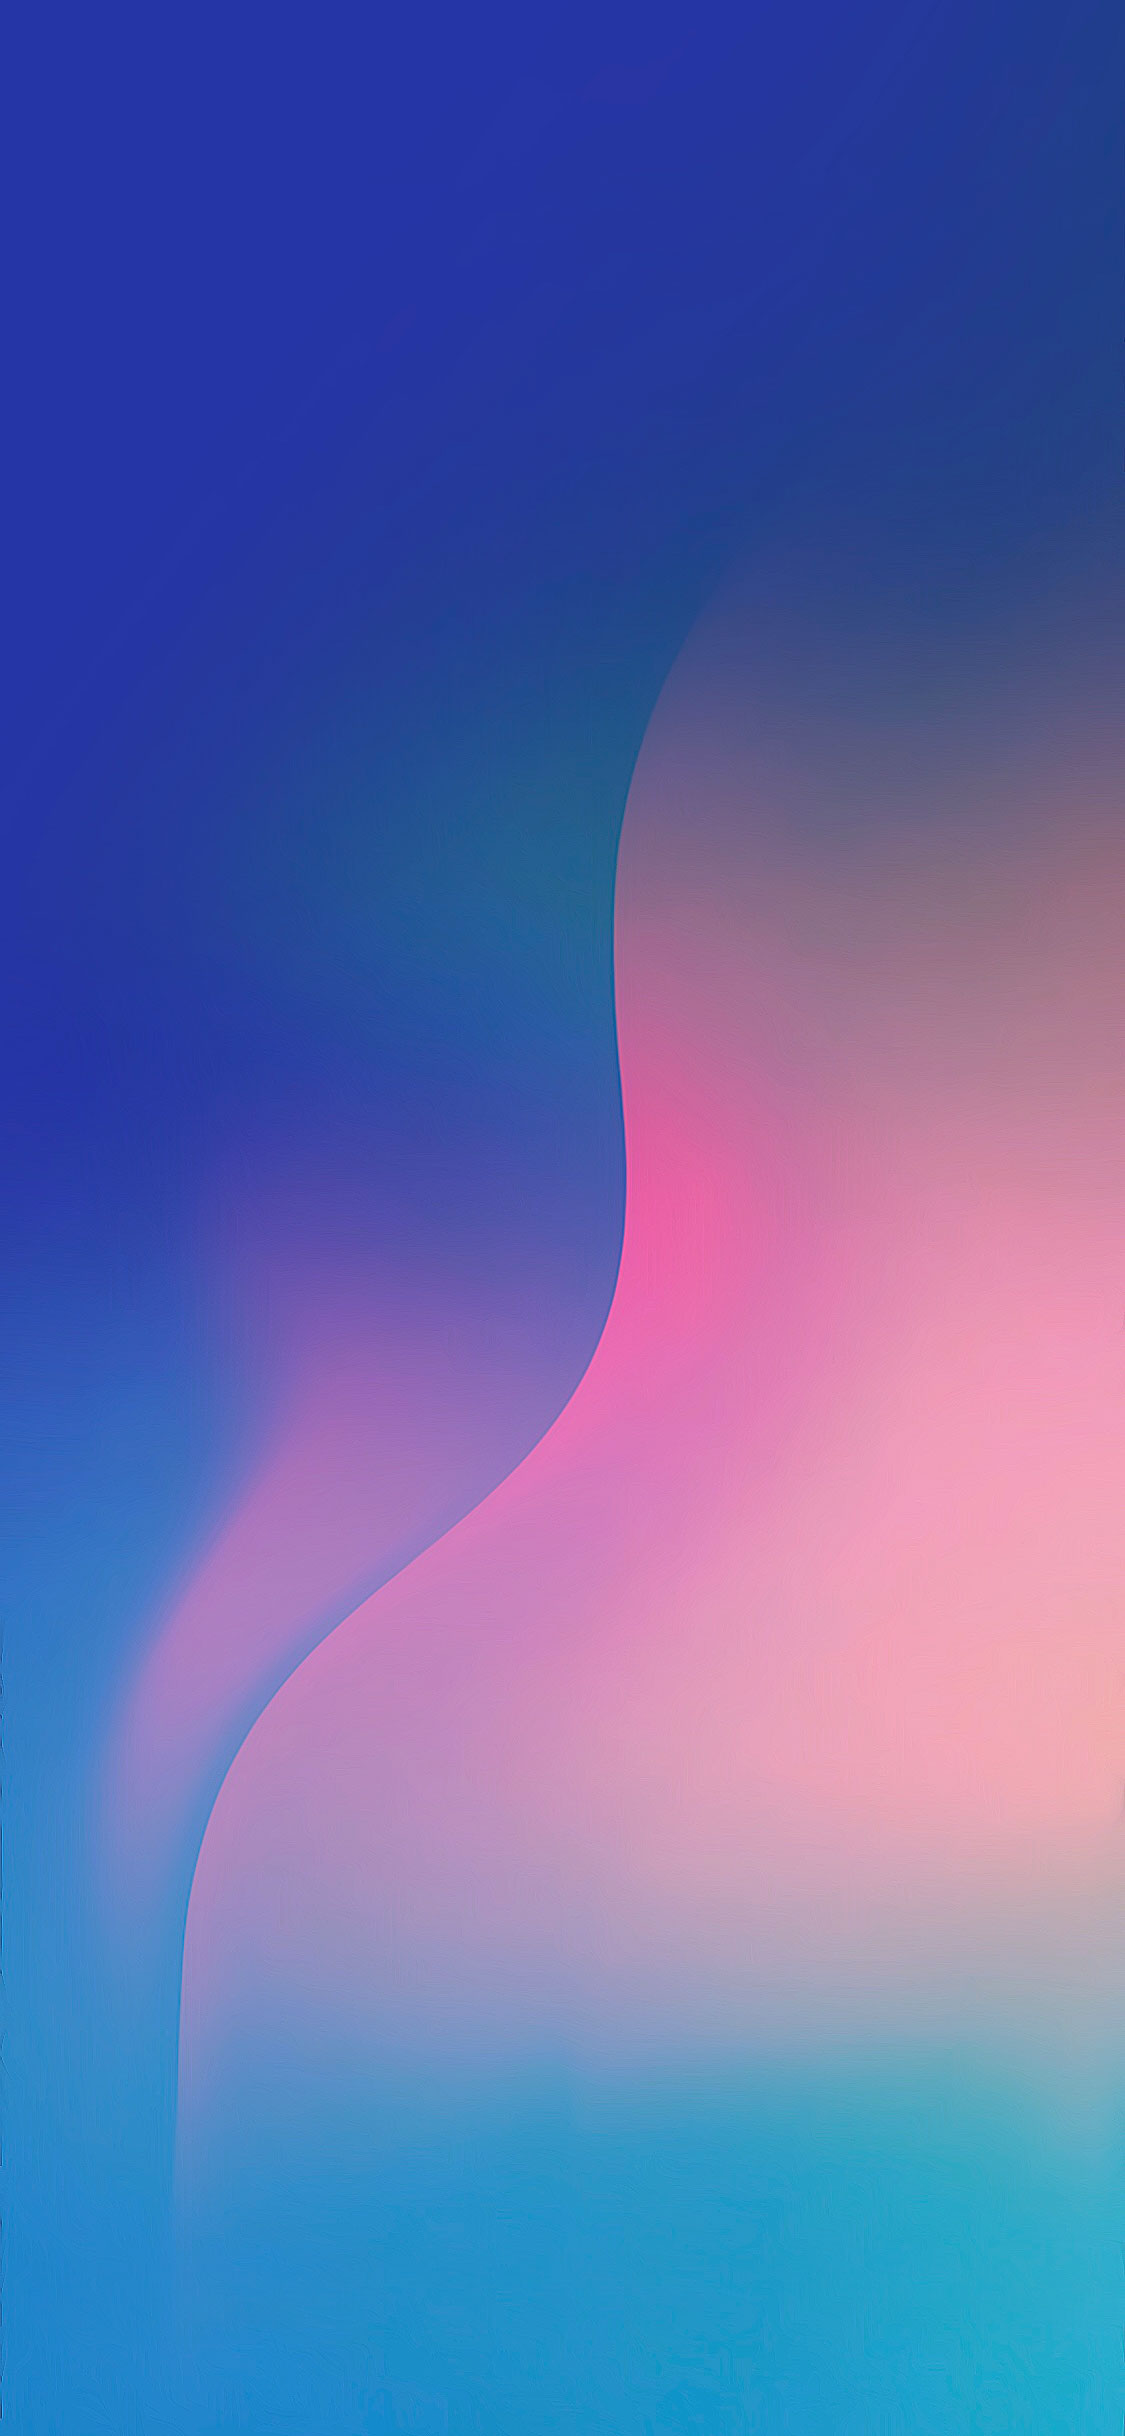 50 Best iPhone X Wallpapers Backgrounds